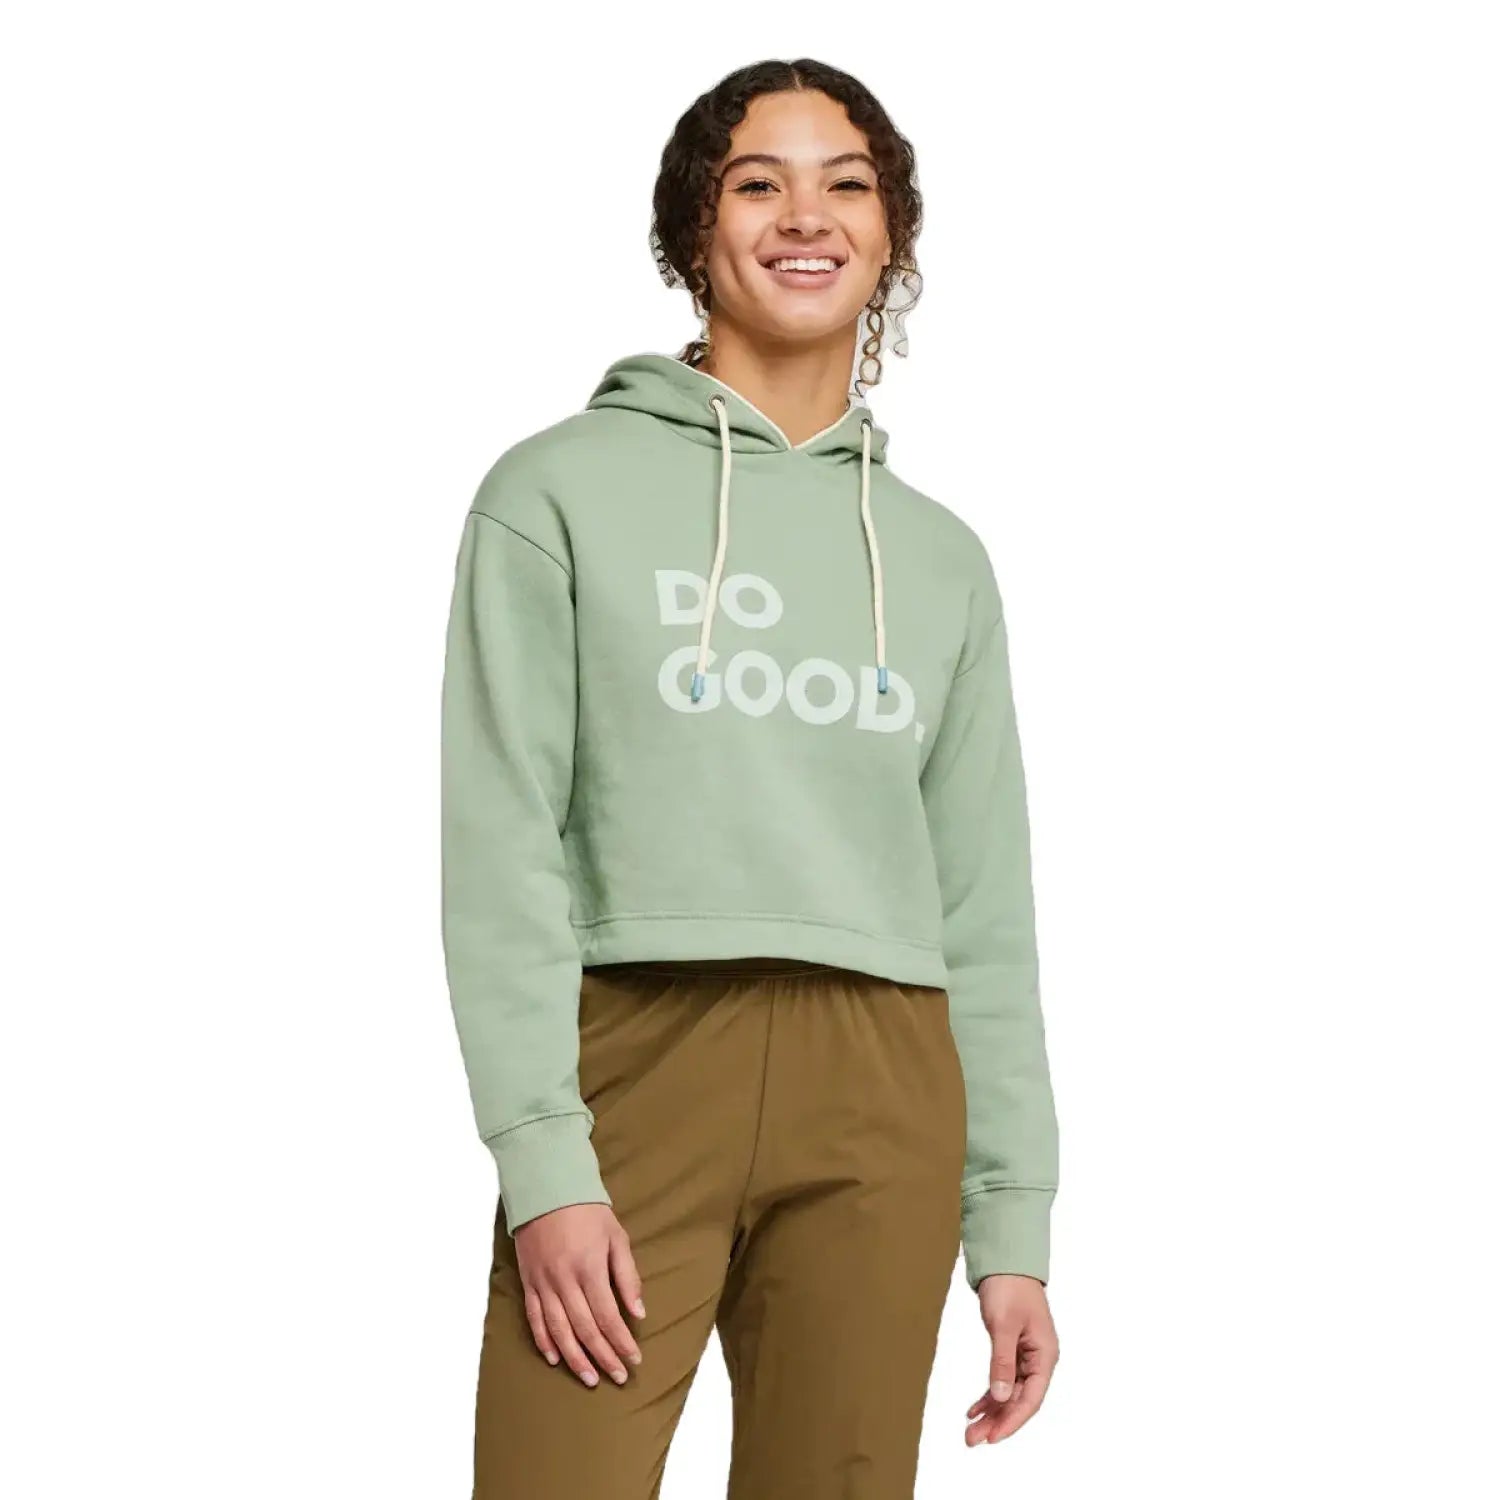 Cotopaxi W's Do Good Crop Sweatshirt, Silver Leaf, front view on model 